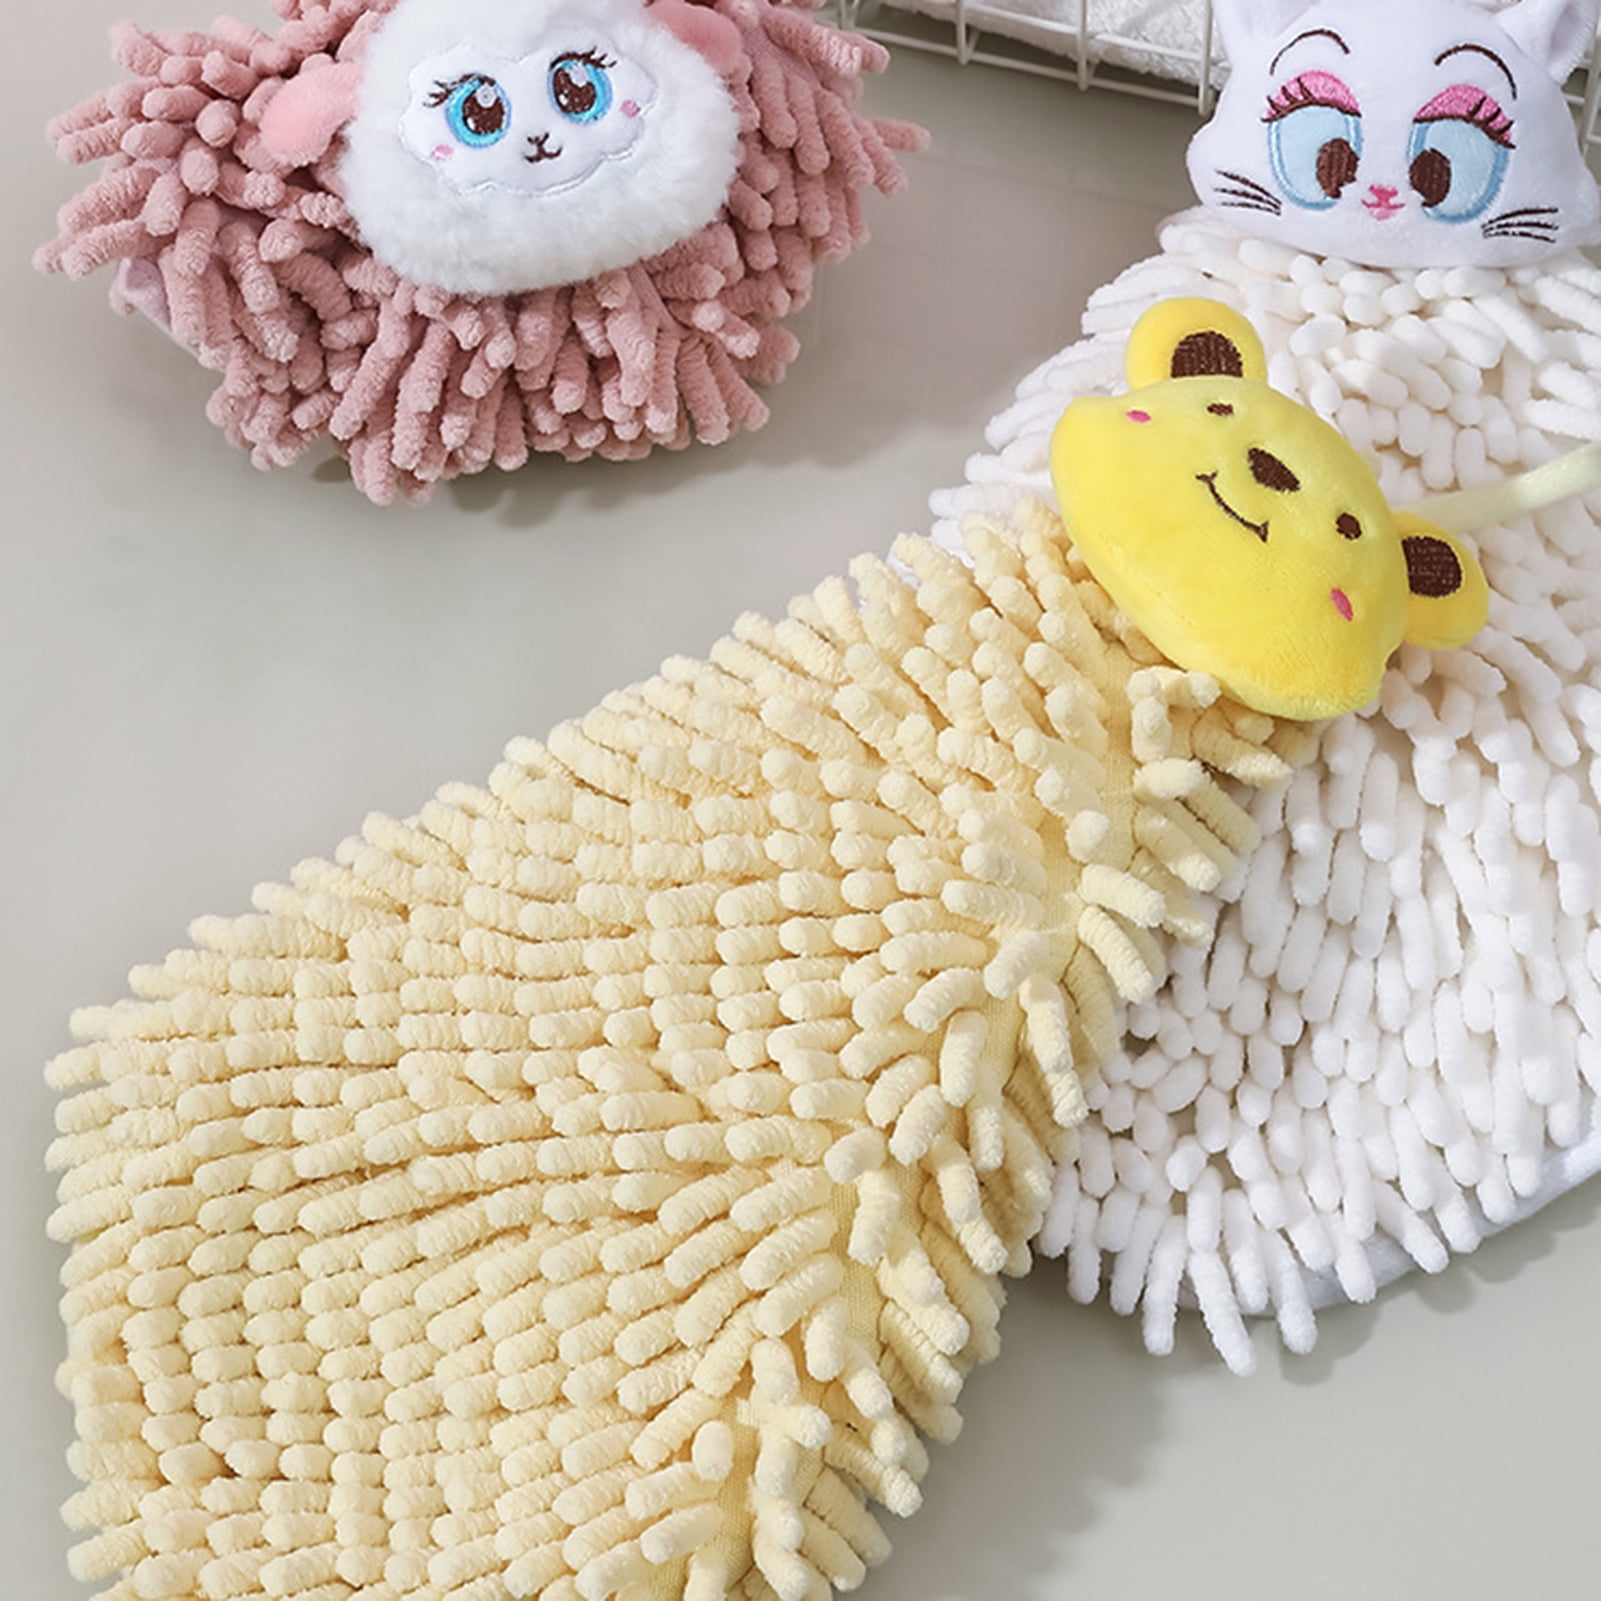 1Pcs Cute Hand Towel Kitchen Towels Bathroom Soft Plush Chenille Hanging  Towel for Dry Hands Ball Towels for Hand